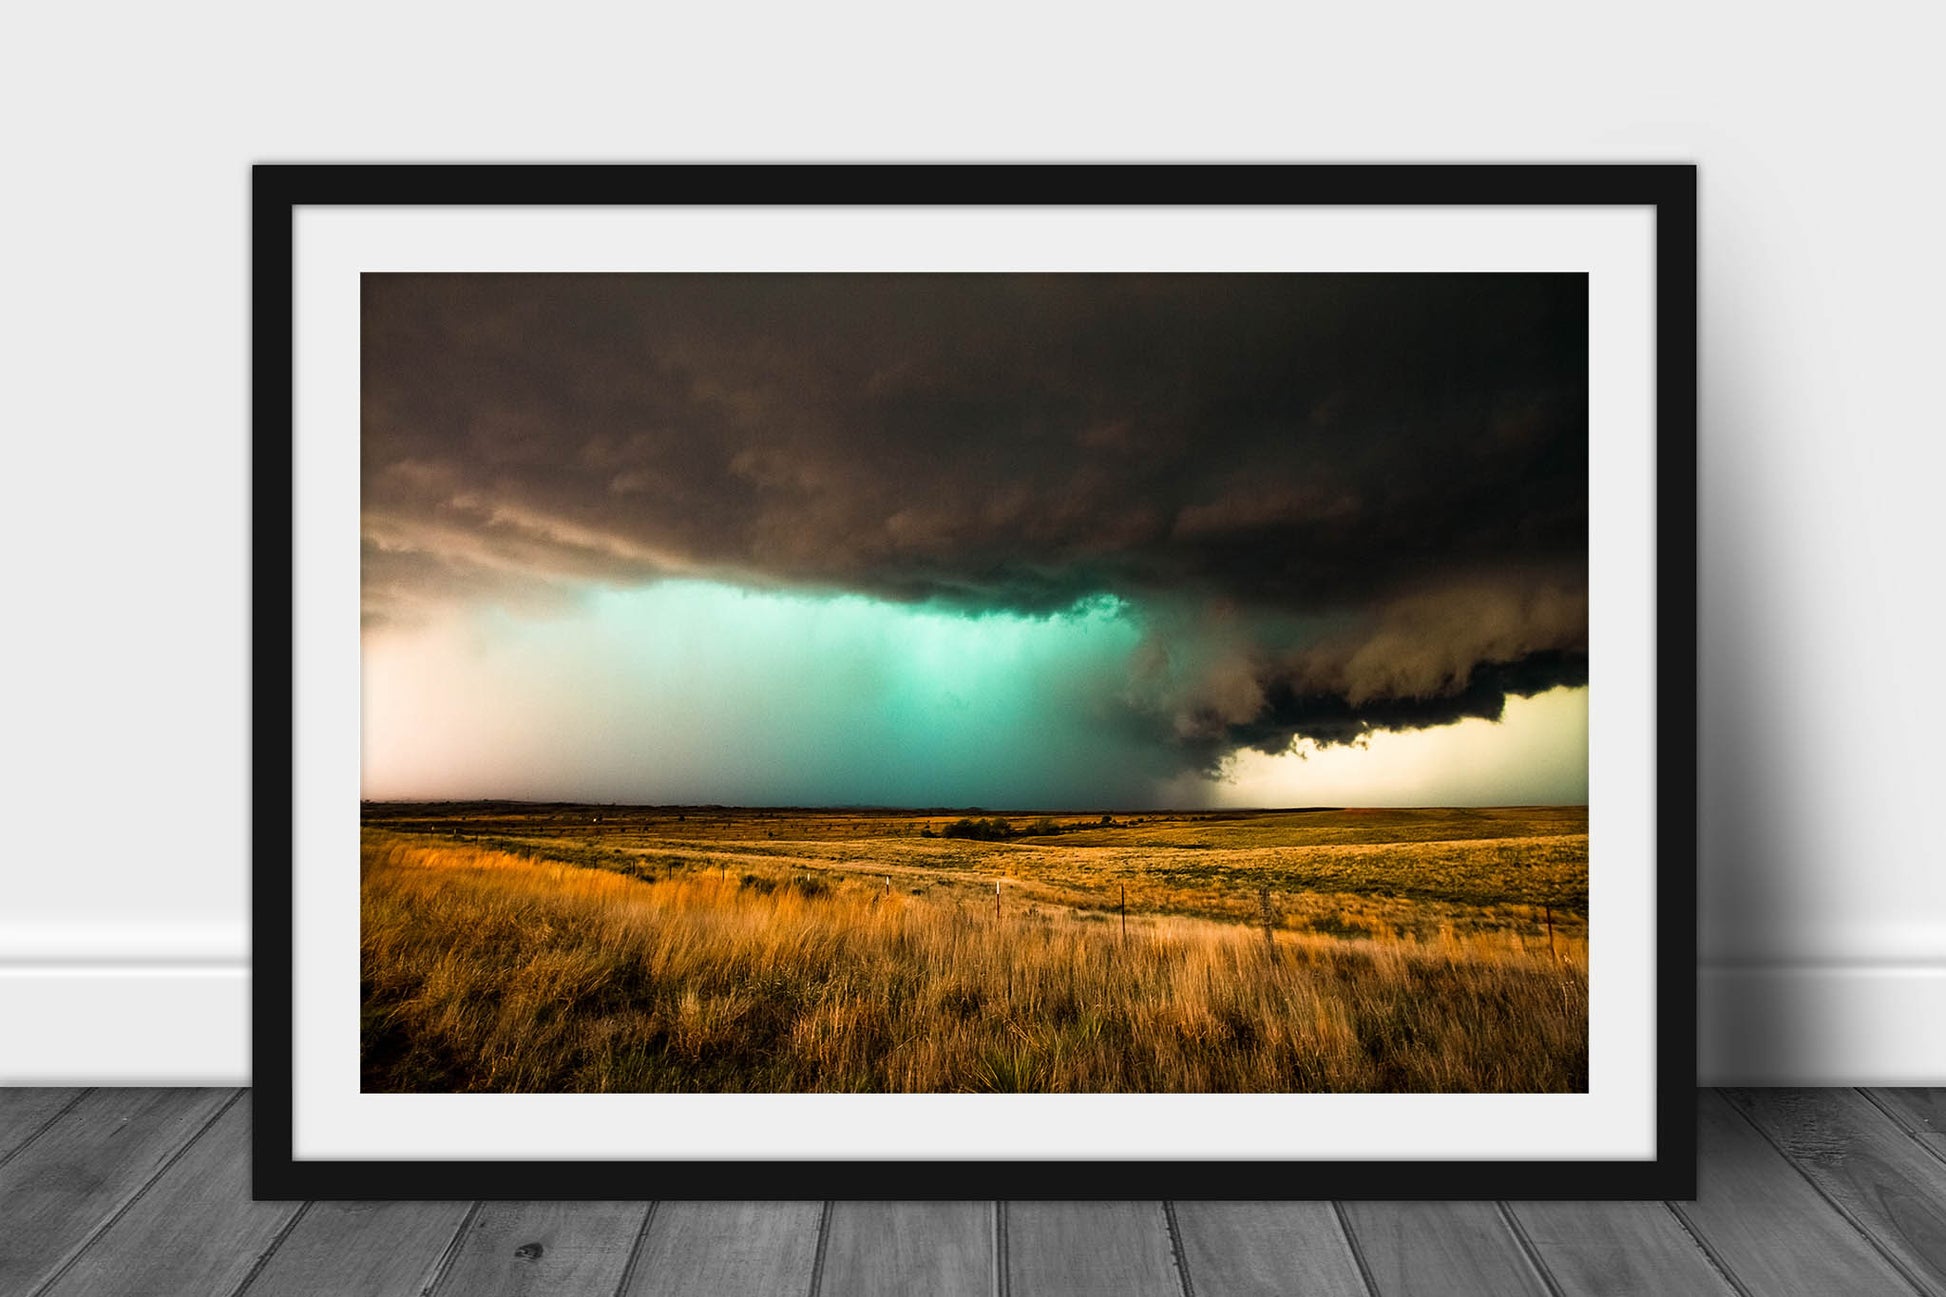 Framed and matted storm photography print of a supercell thunderstorm with a teal hue over open prairie on a spring day in the Texas Panhandle by Sean Ramsey of Southern Plains Photography.